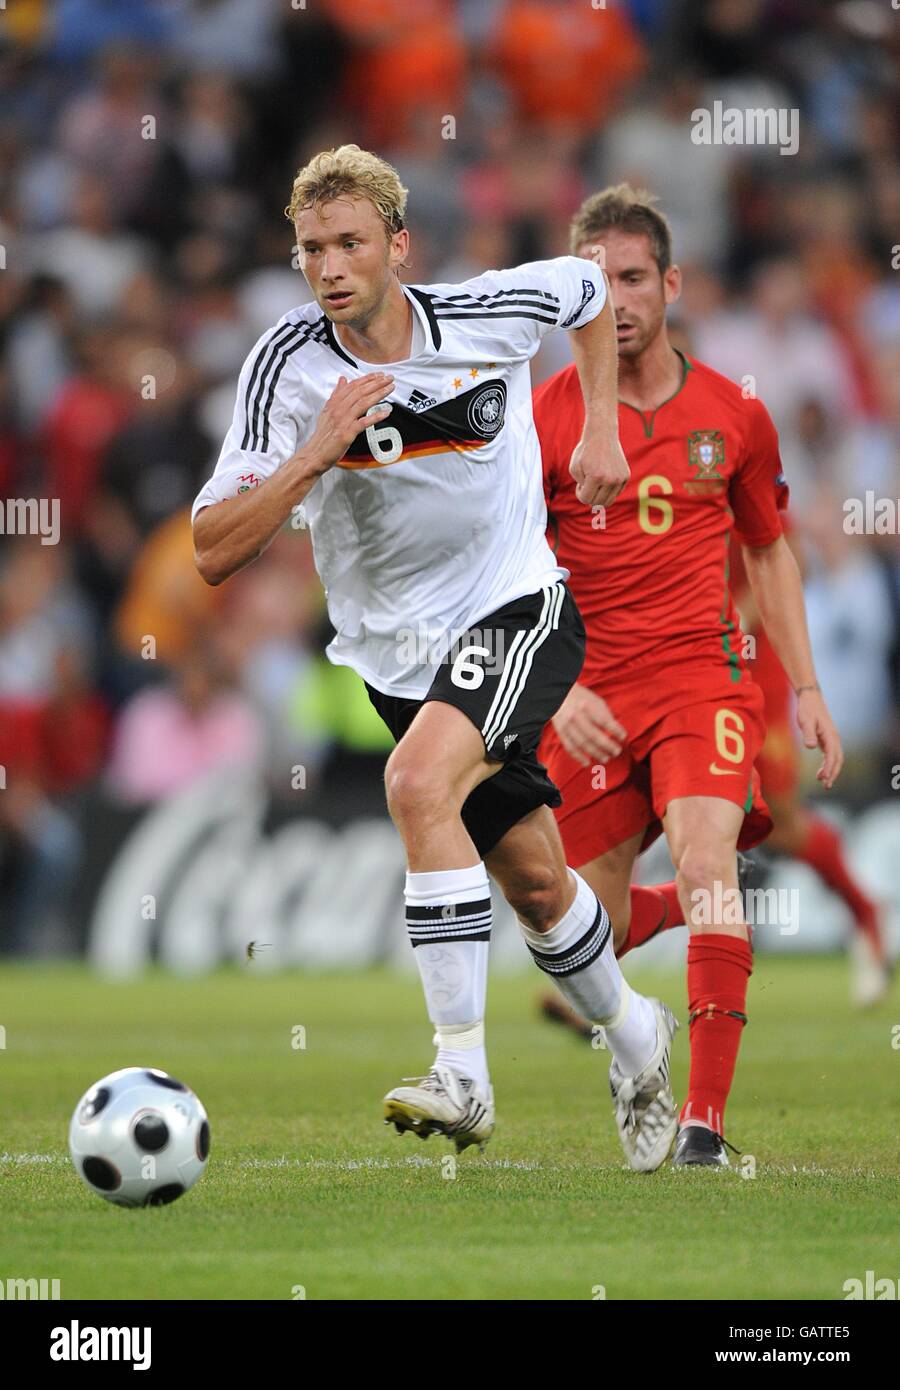 Soccer - UEFA European Championship 2008 - Quarter Final - Portugal v Germany - St Jakob-Park. Germany's Simon Rolfes attempts to get away from Portugal's Jose Raul Meireles Stock Photo